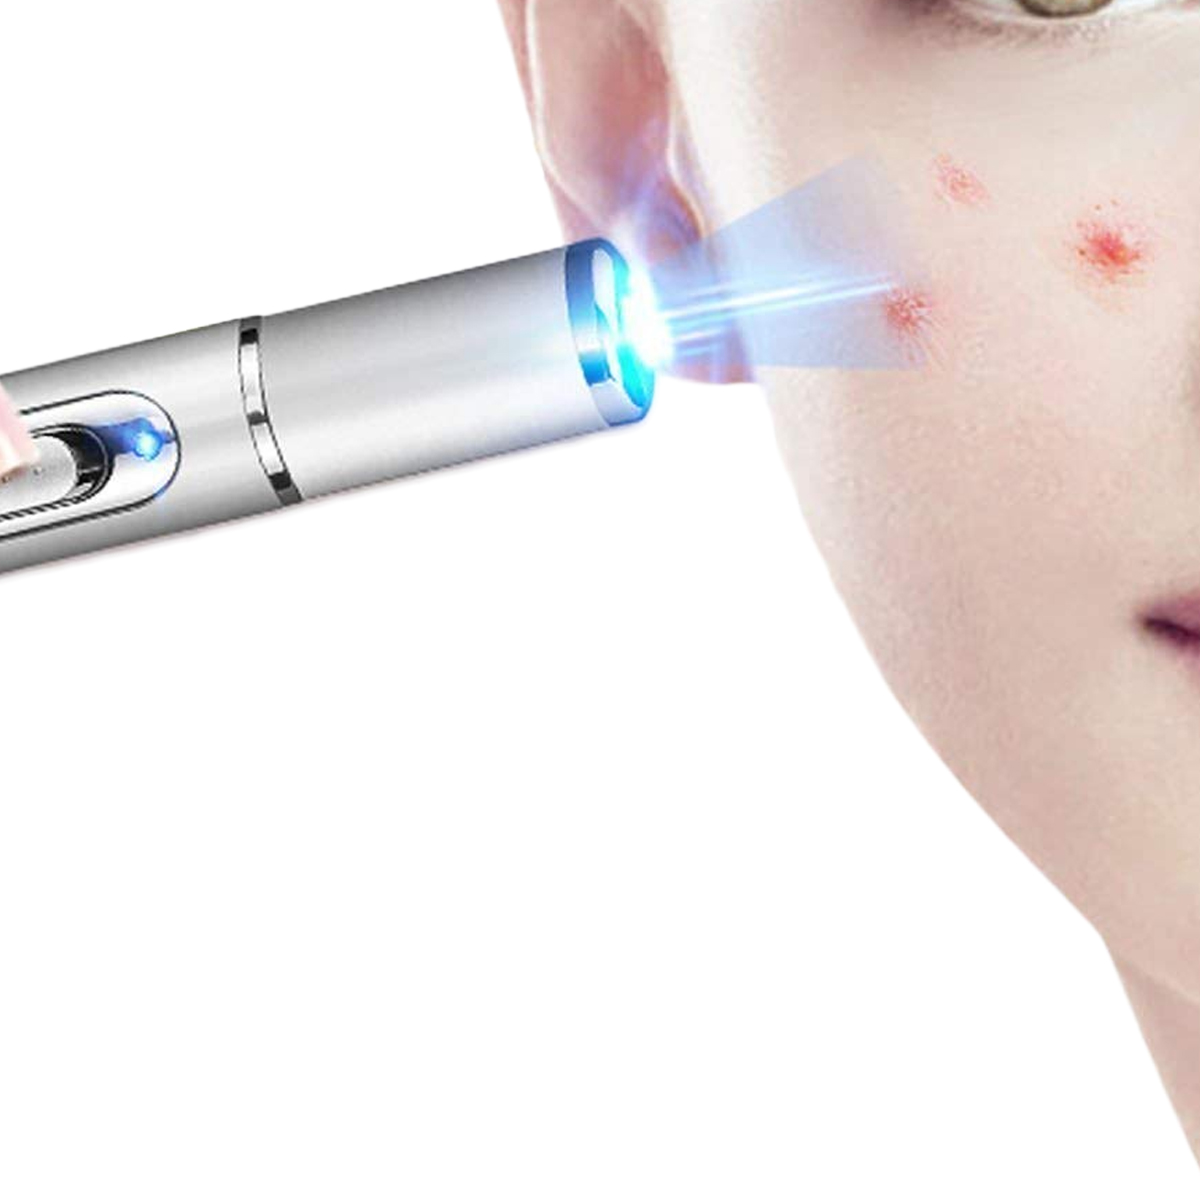 RUEWEY Medical Blue Light Therapy Laser Treatment Pen Acne Skin Care Device - image 1 of 5